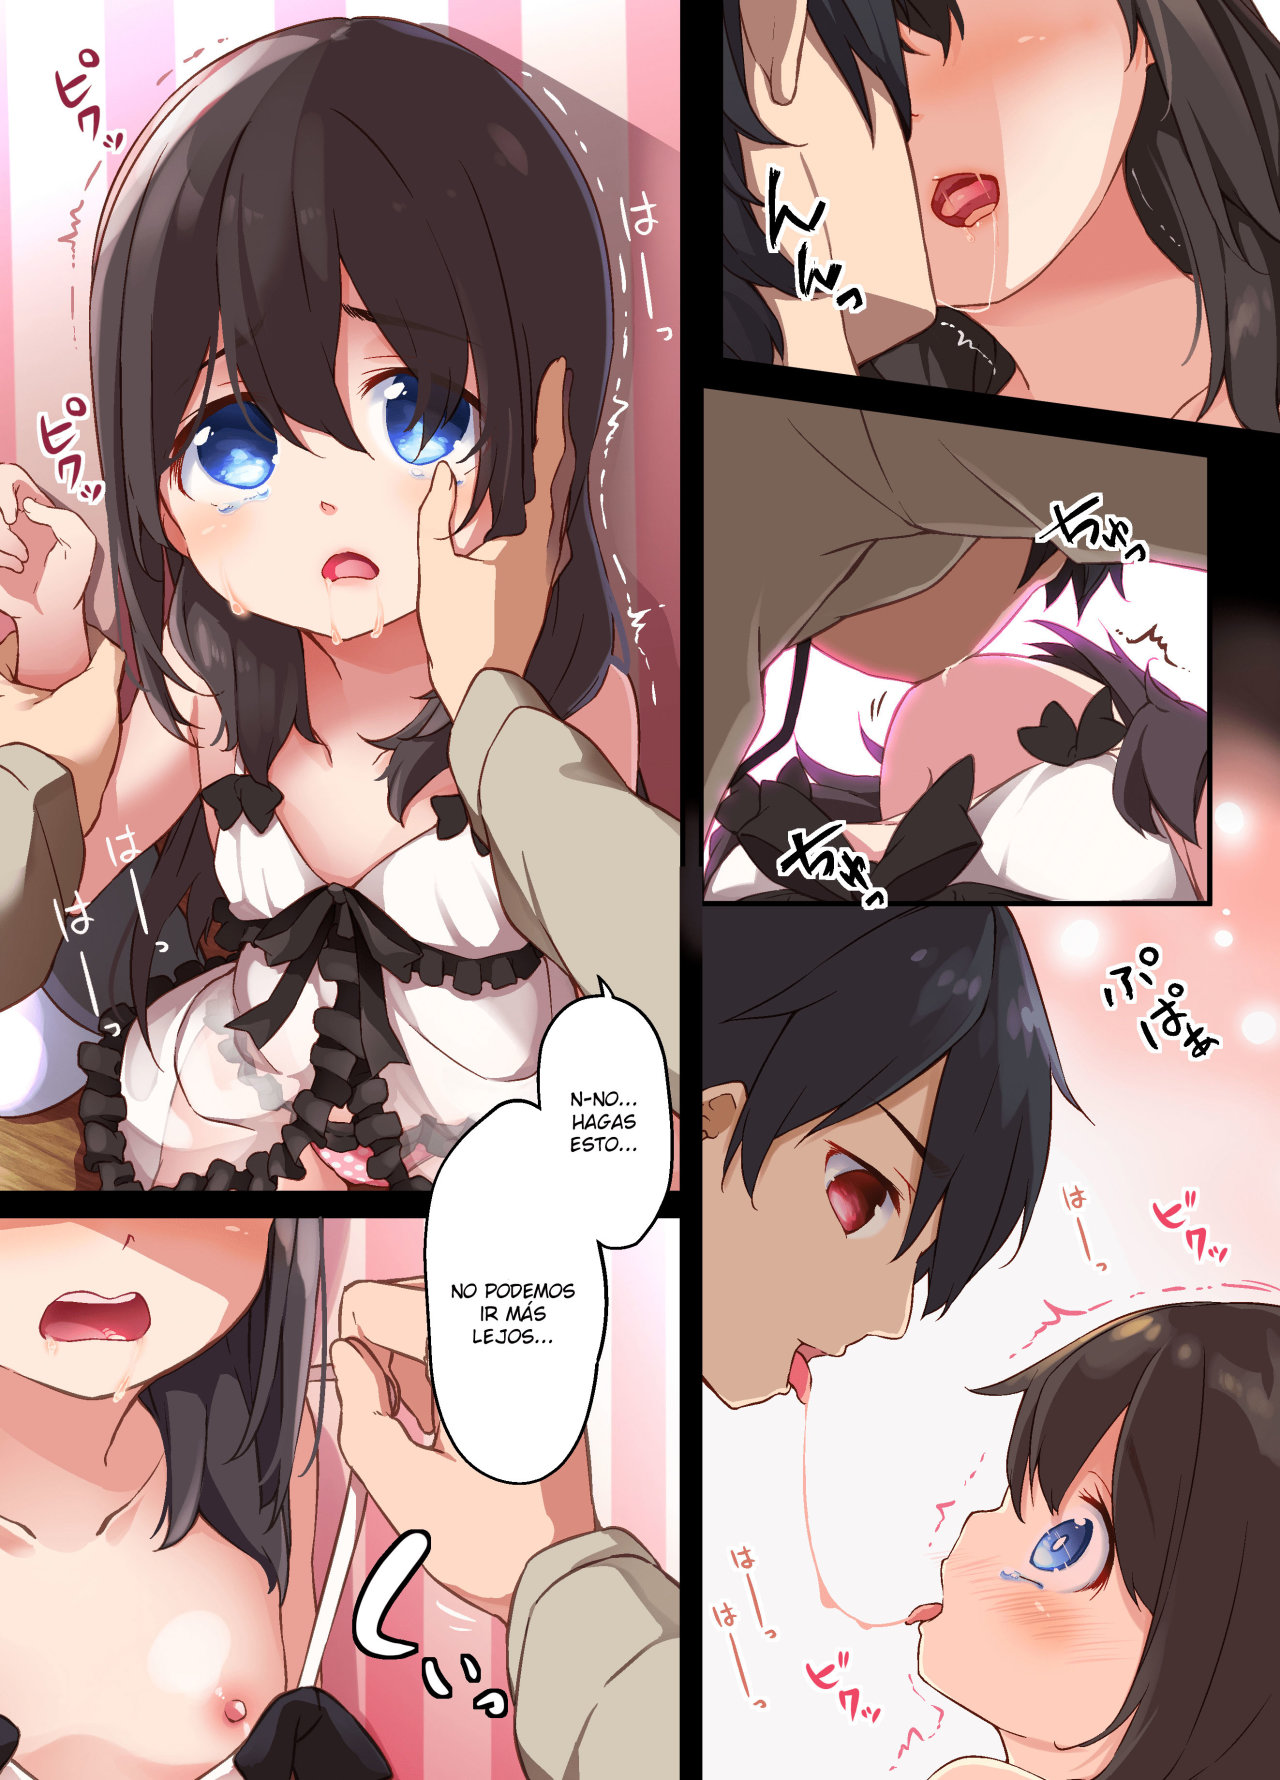 A Yandere Little Sister wants to be impregnated by her big brother - 14